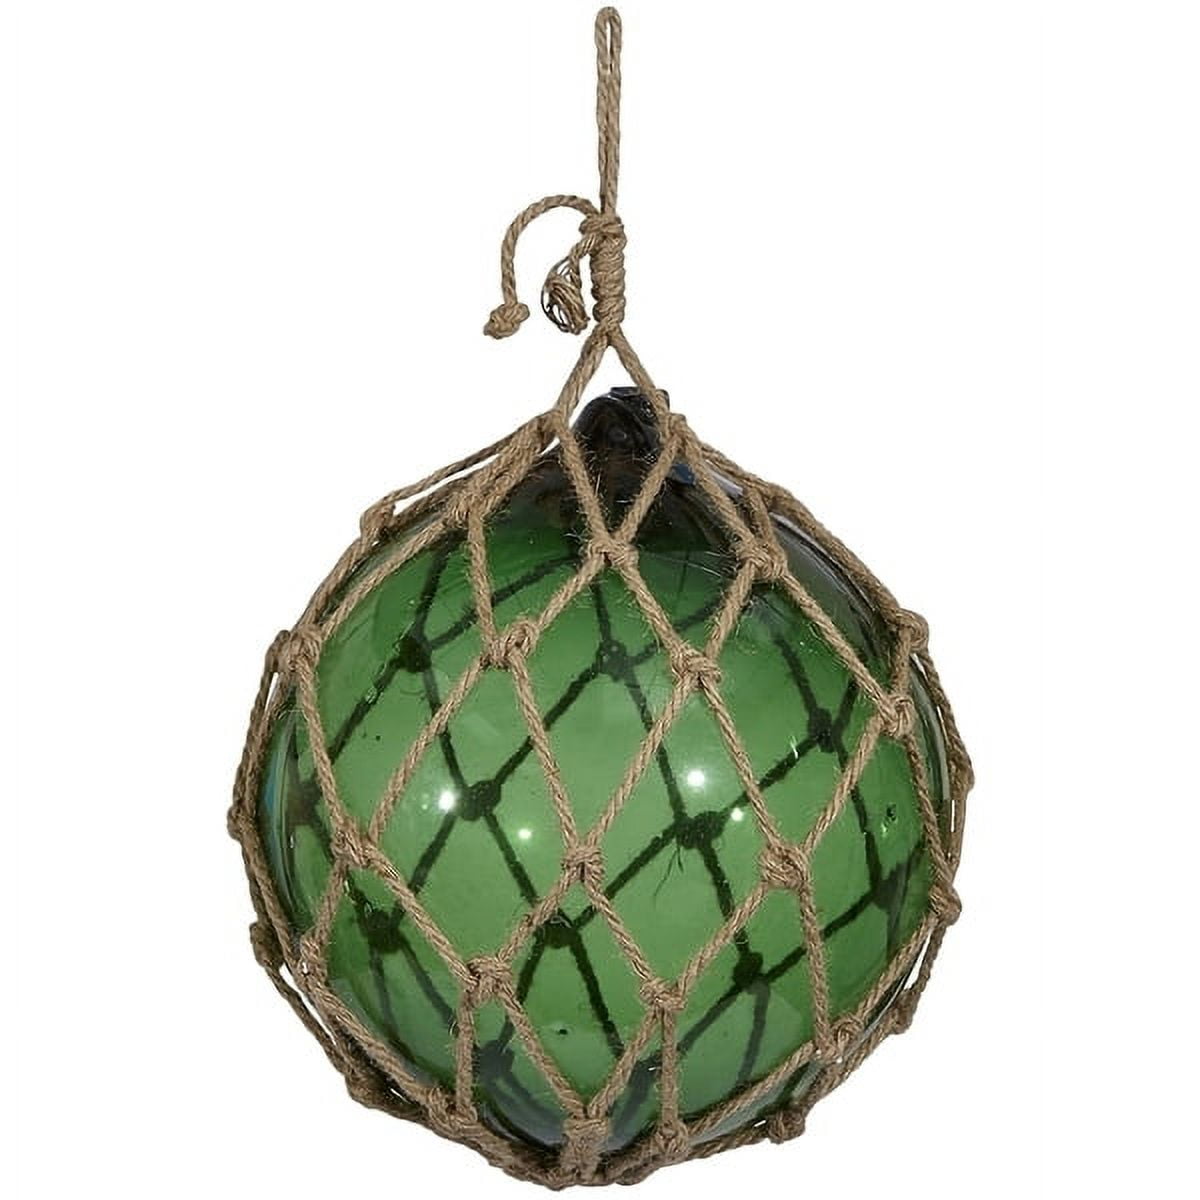 Green Glass Float in Netting Japanese Fishing Glass Floats Buoy 15 